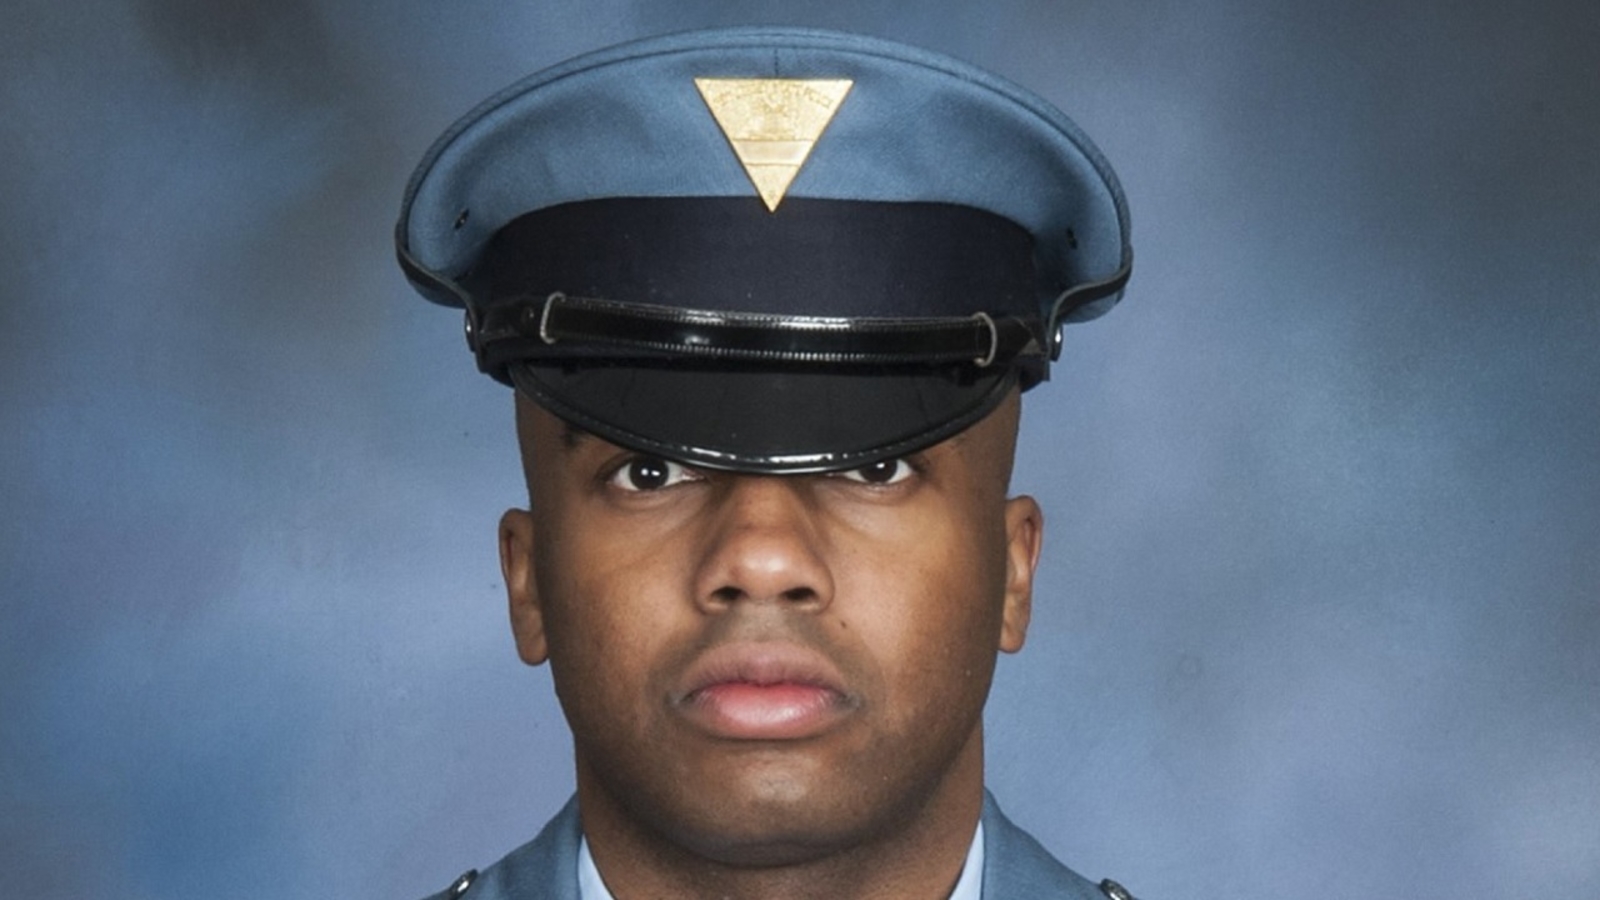 New Jersey state trooper Marcellus E. Bethea dies during training in Ewing Township, officials report [Video]